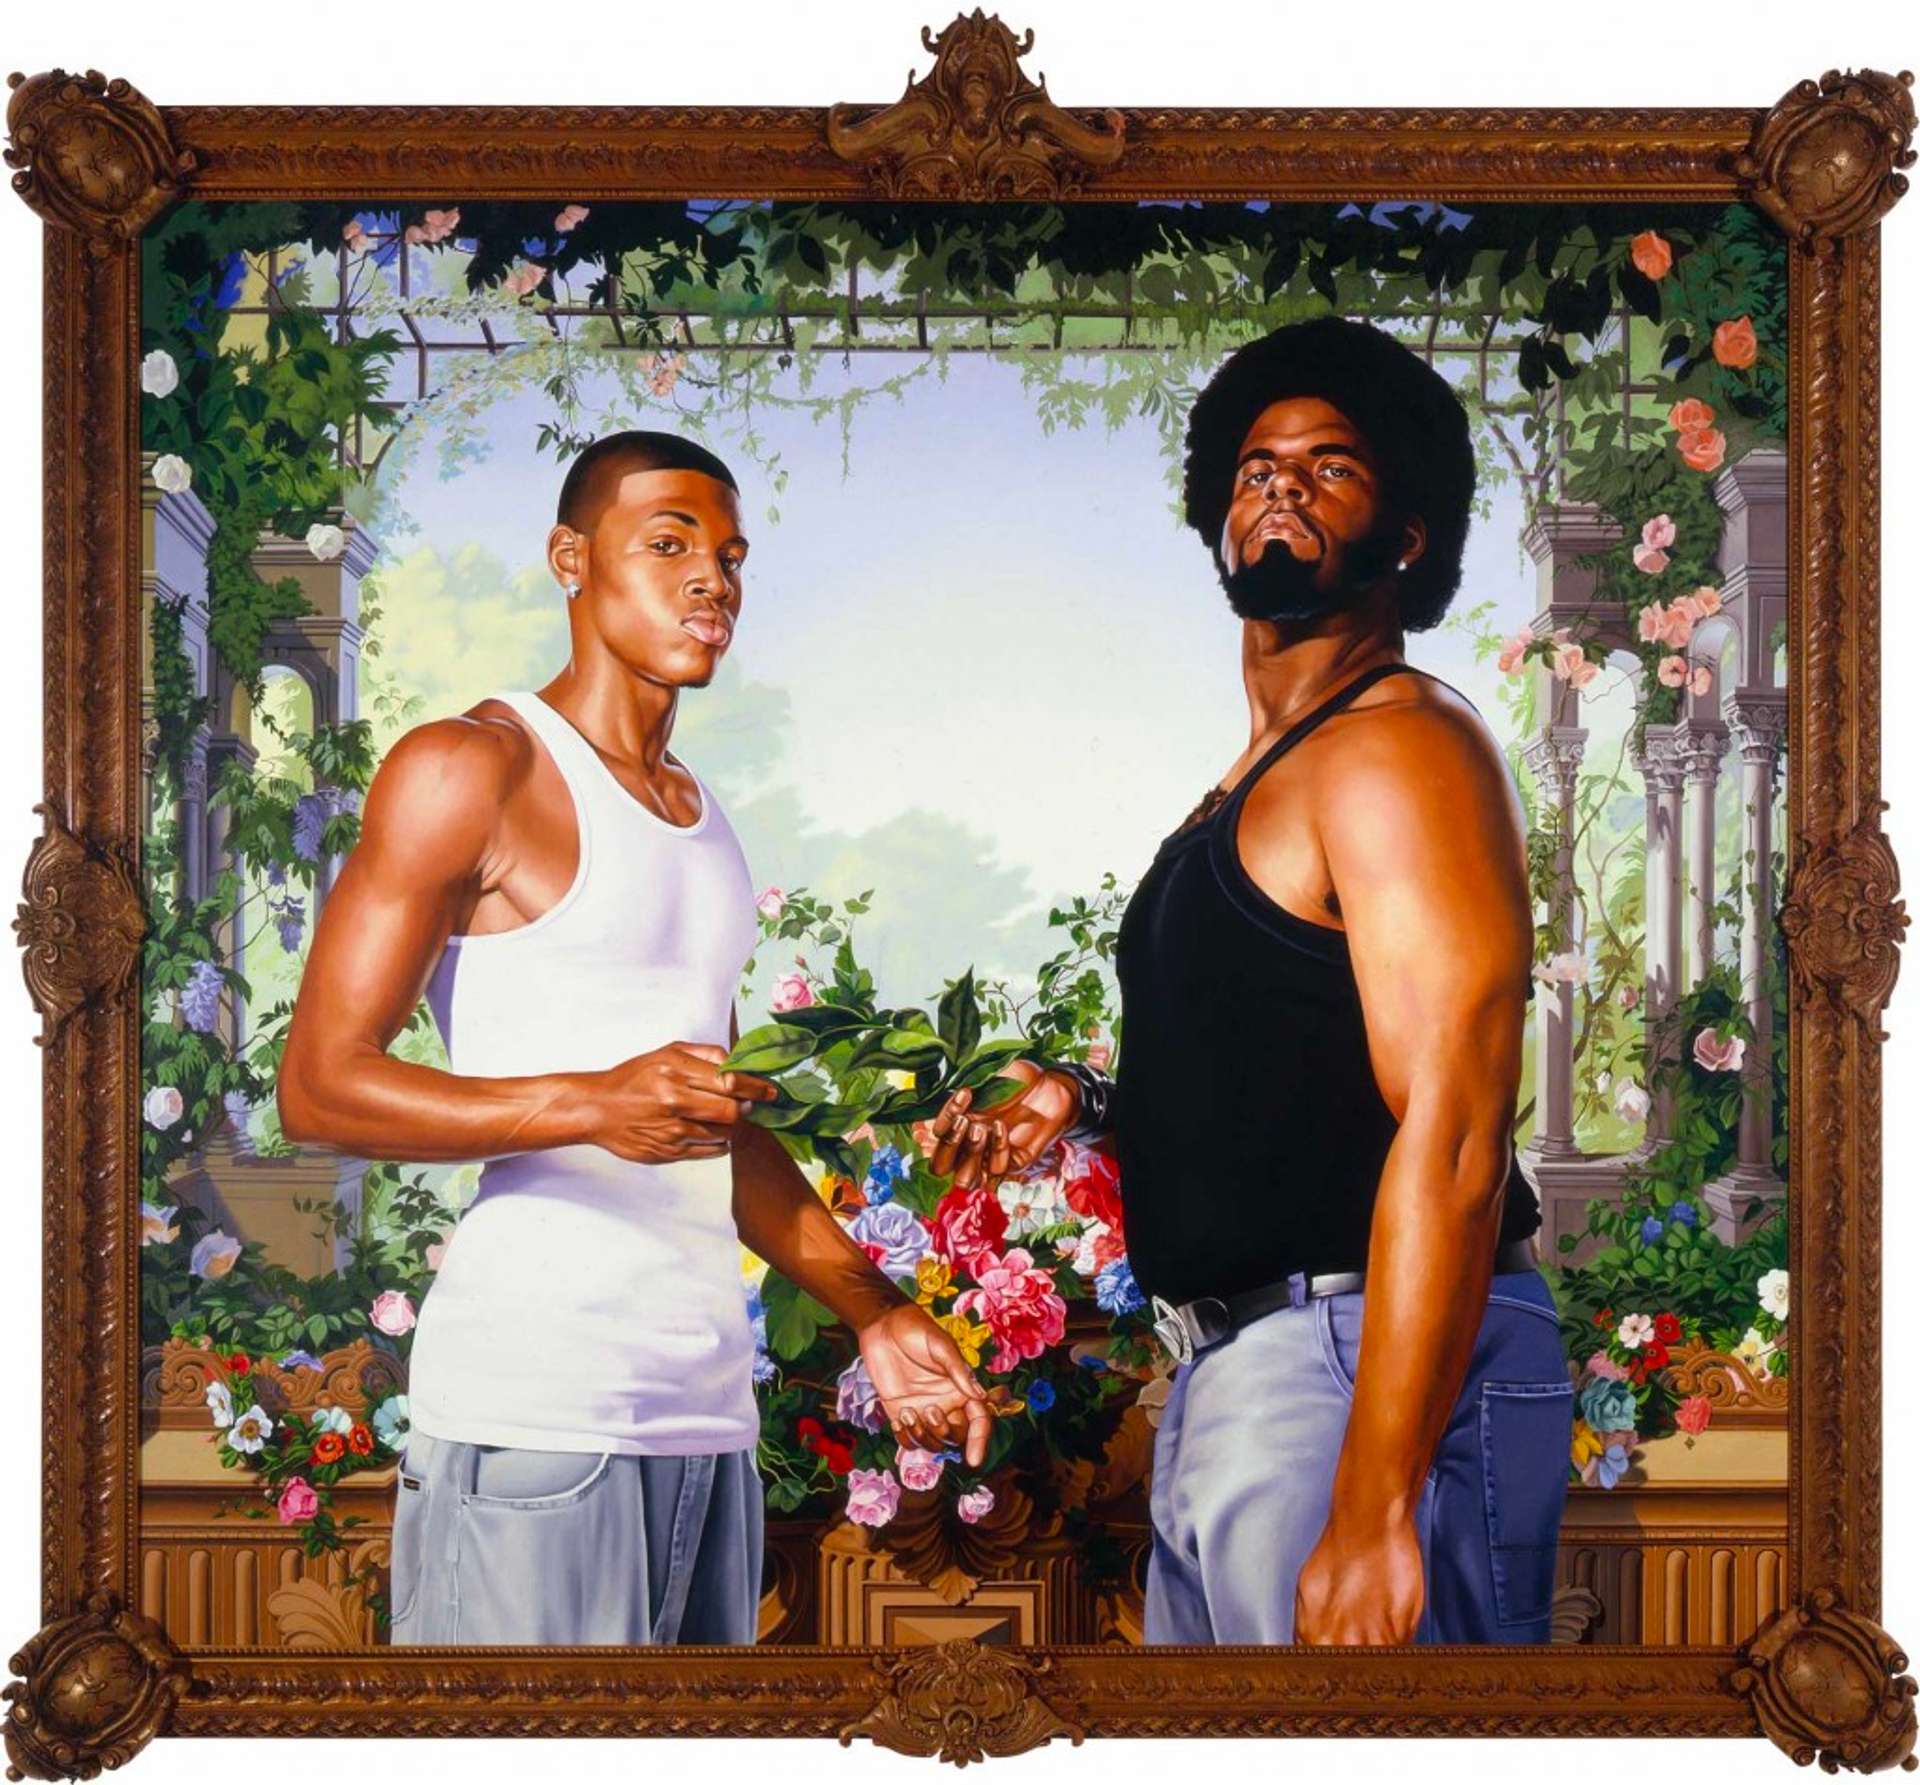 Two young men dressed in vests and jeans stand next to each other, their bodies angled sideways and looking down at the camera. They hold a branch of leaves together; behind them is a decadent bouquet and roses wrapping around stone arches in the distance.